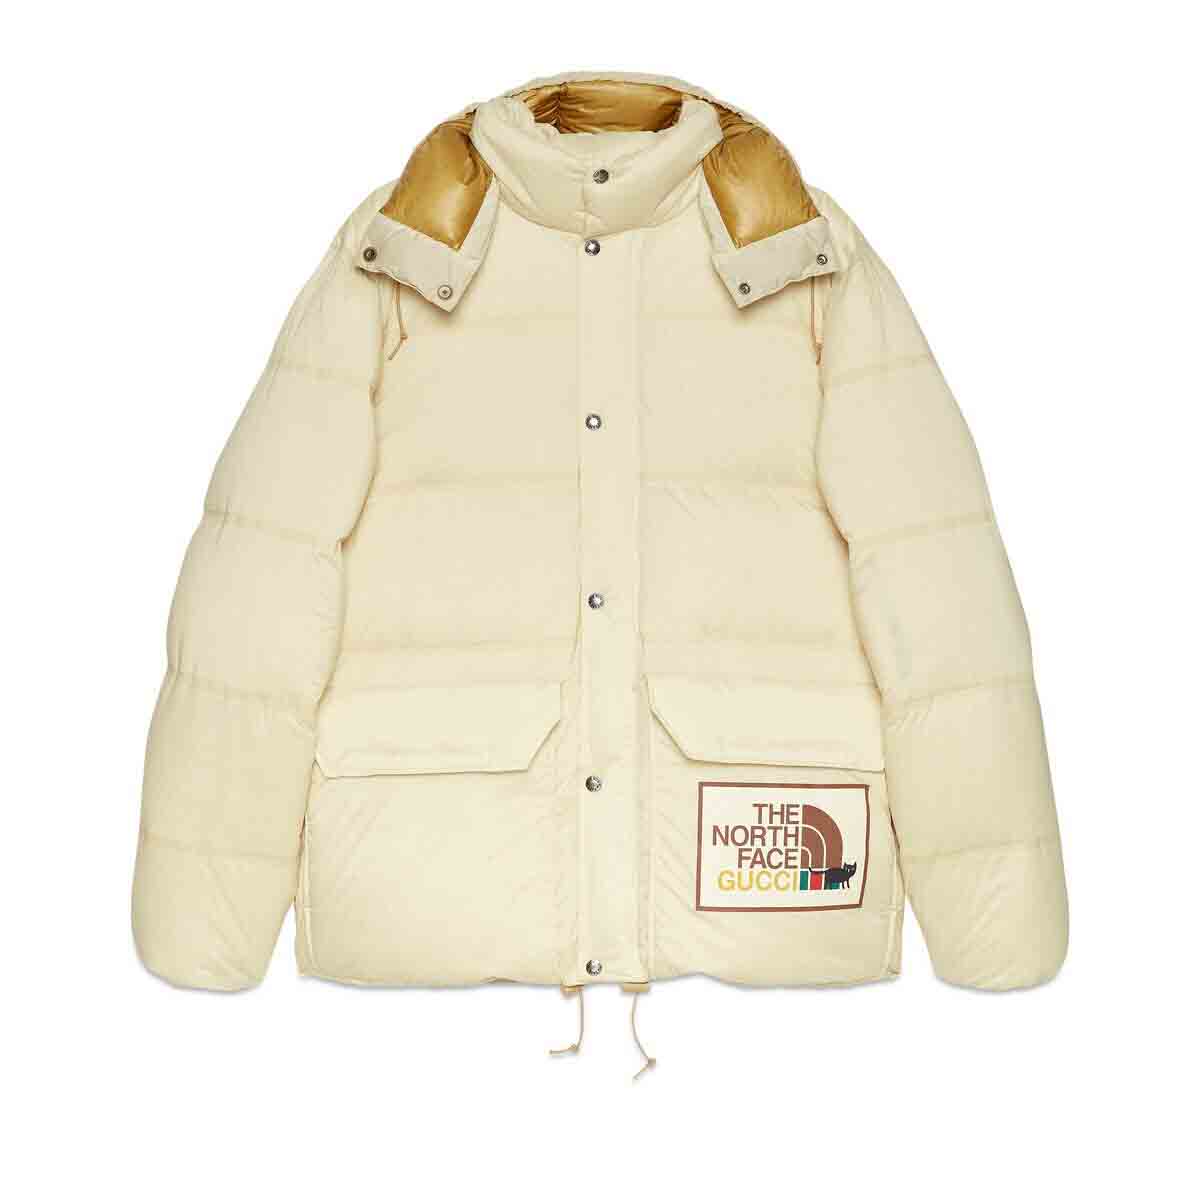 Gucci x The North Face Down Jacket Beige Men's - FW21 - GB